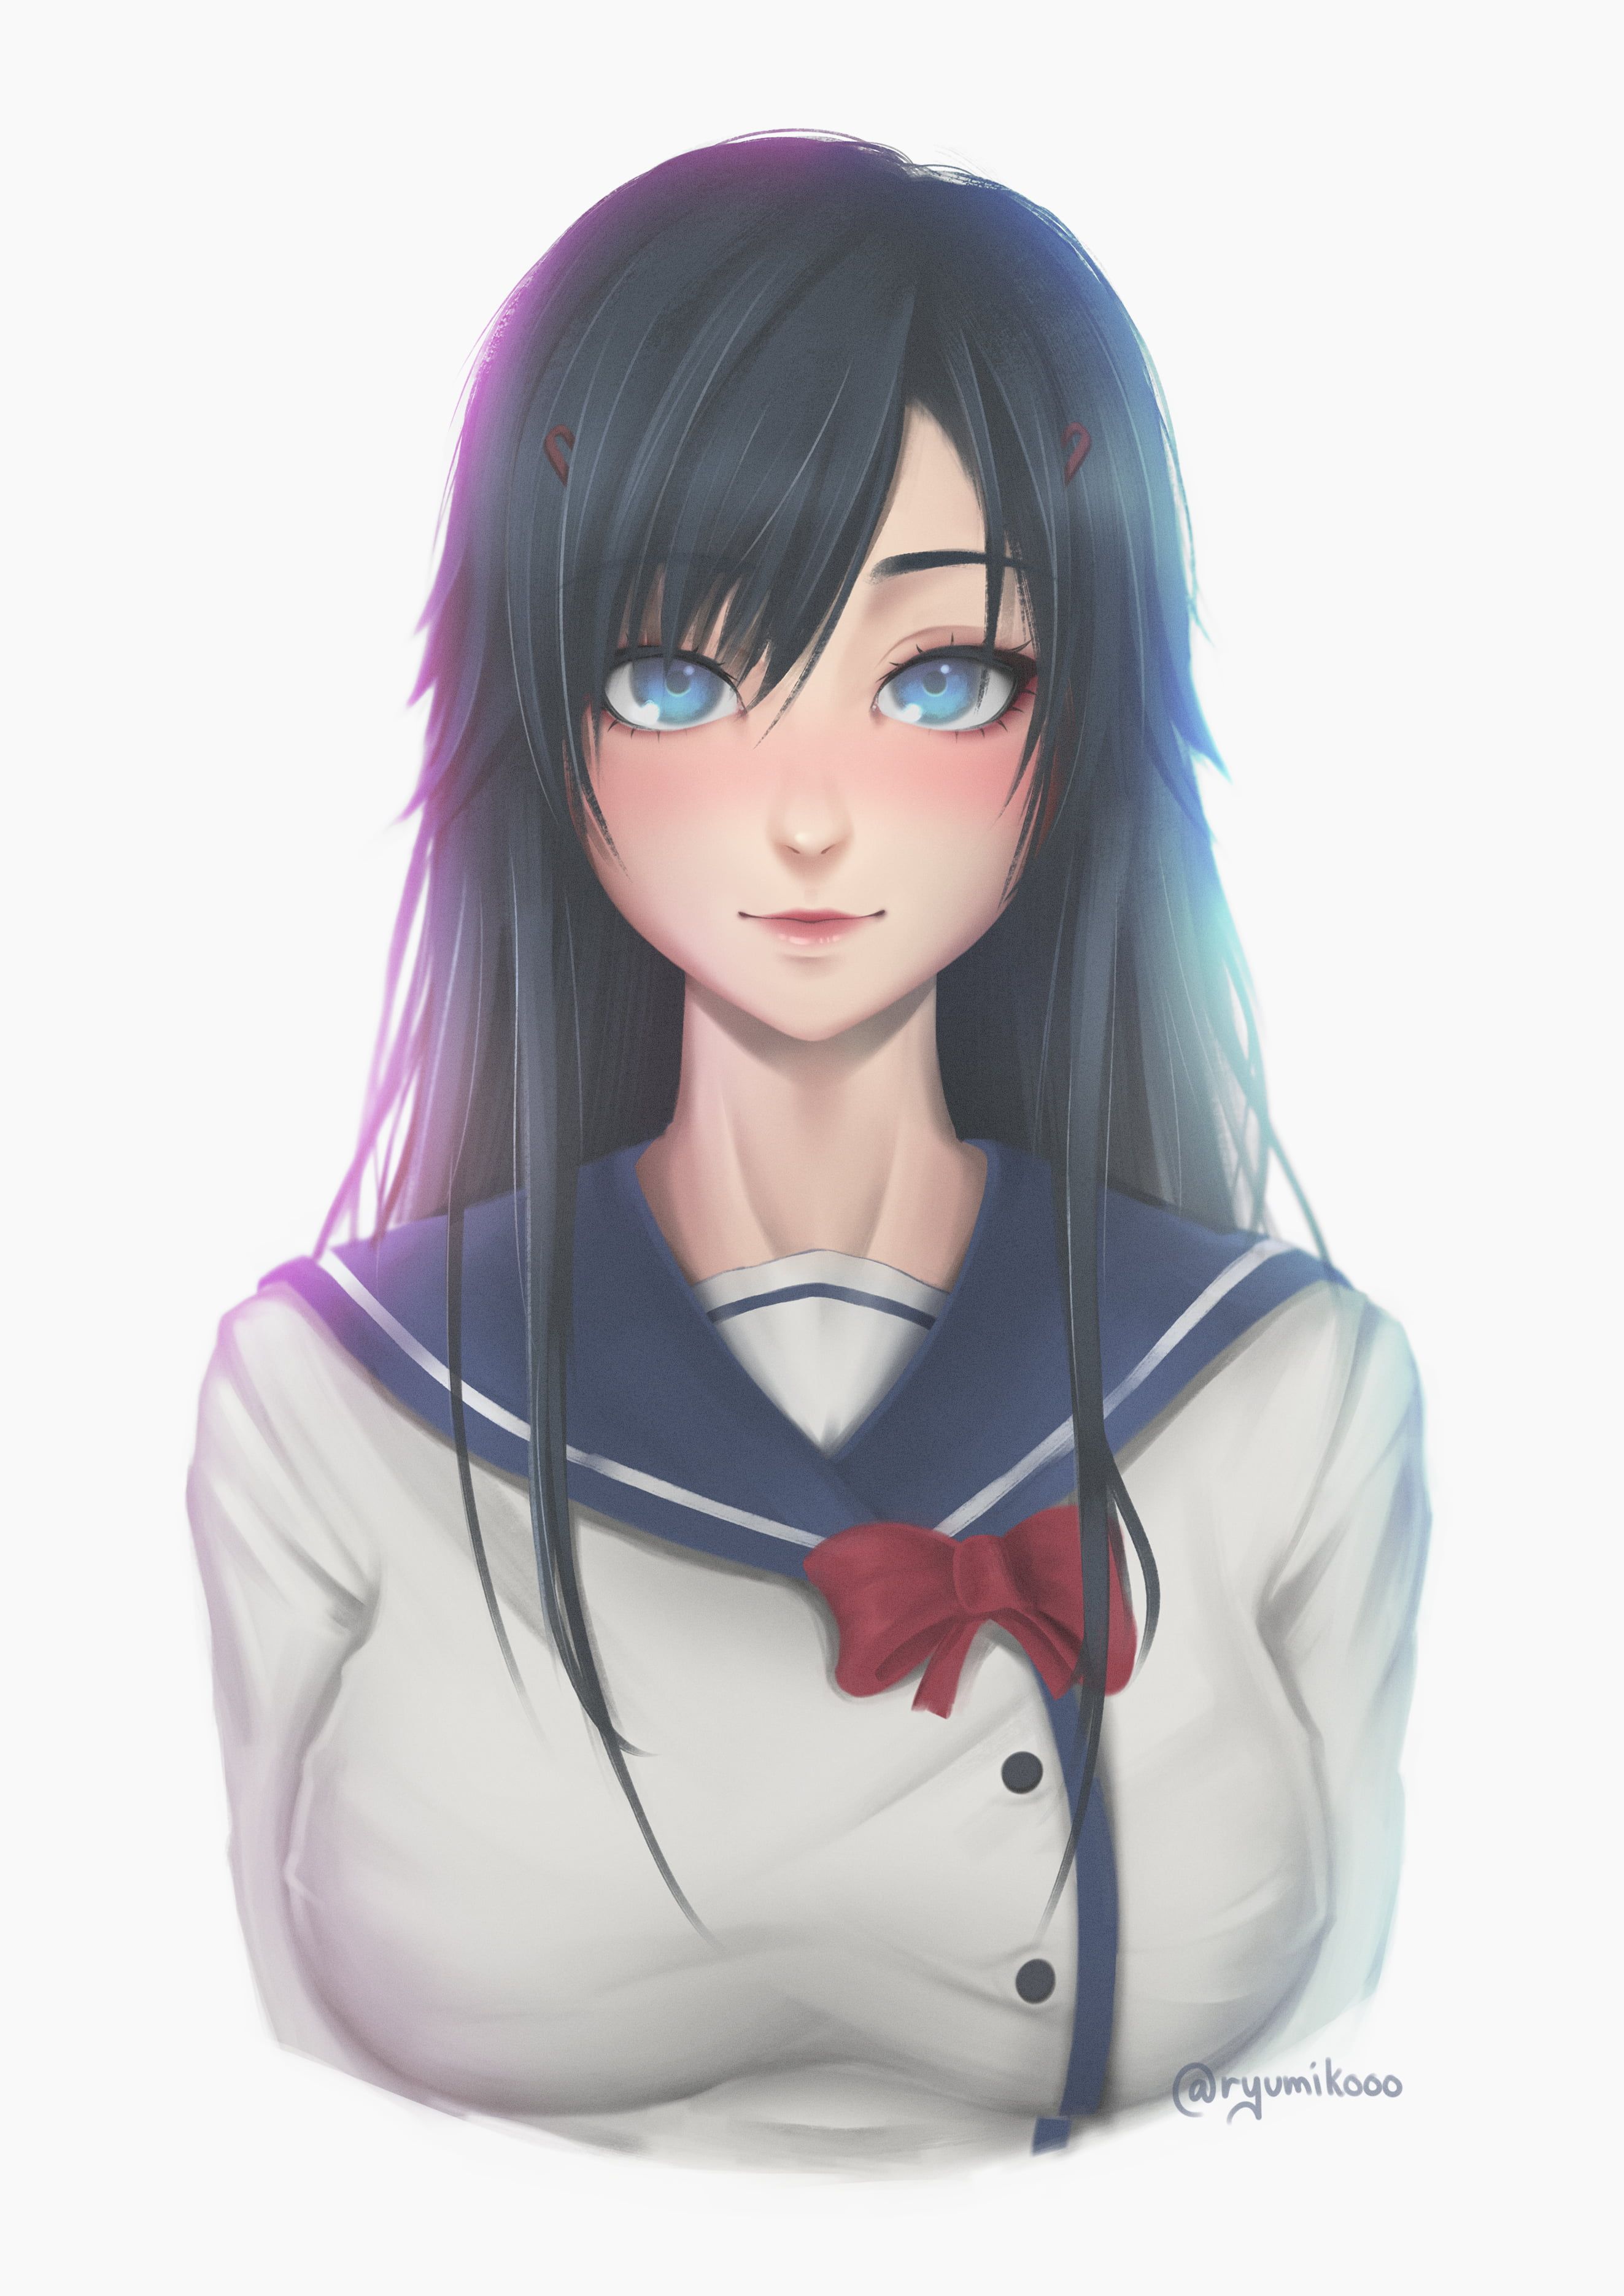 Draw cute female bust up anime oc fanart for profile picture by Hanahello   Fiverr